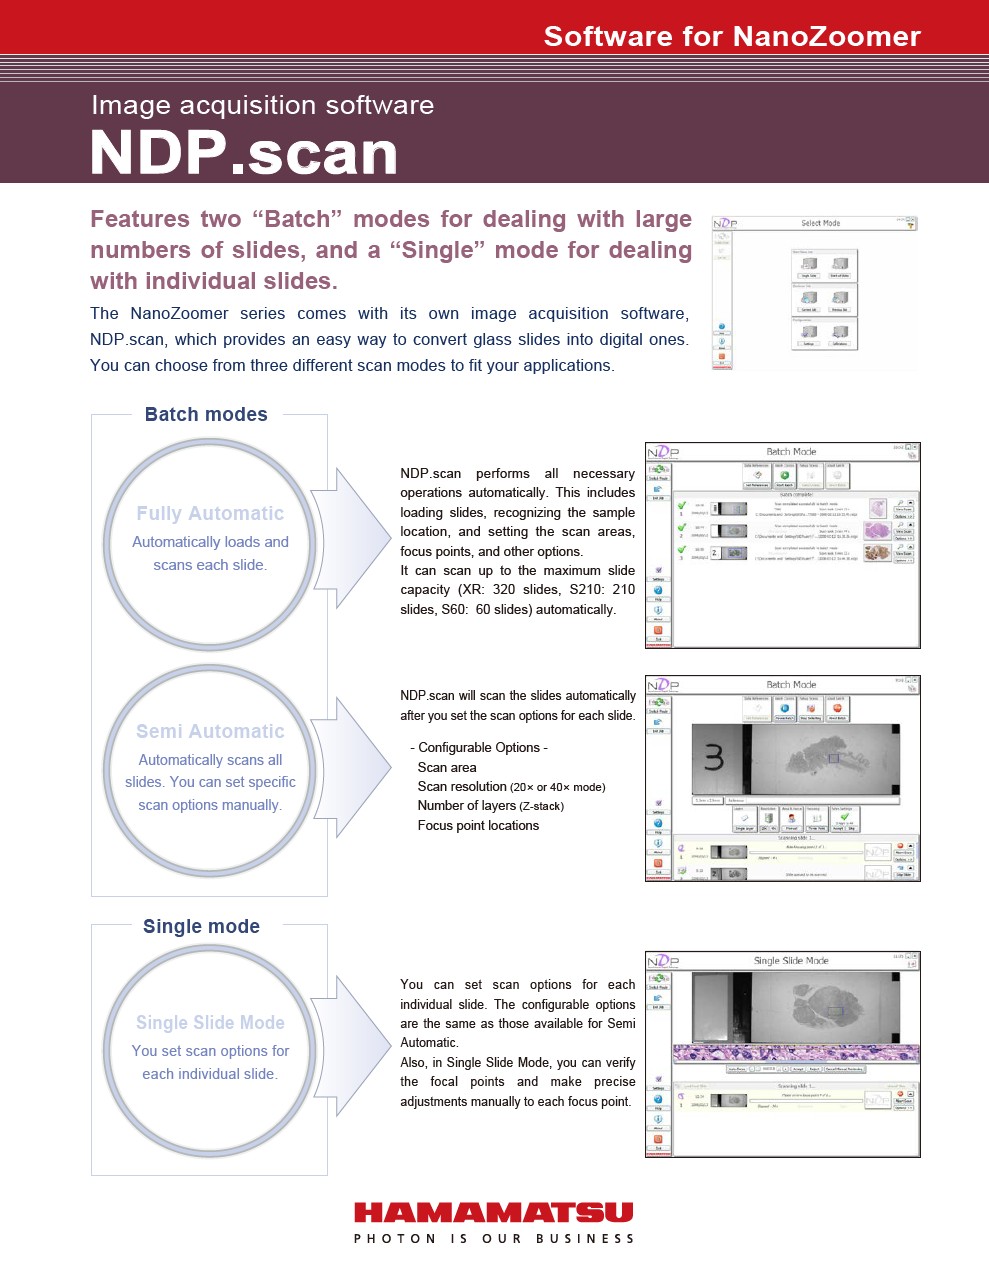 Image acquisition software NDP.scan